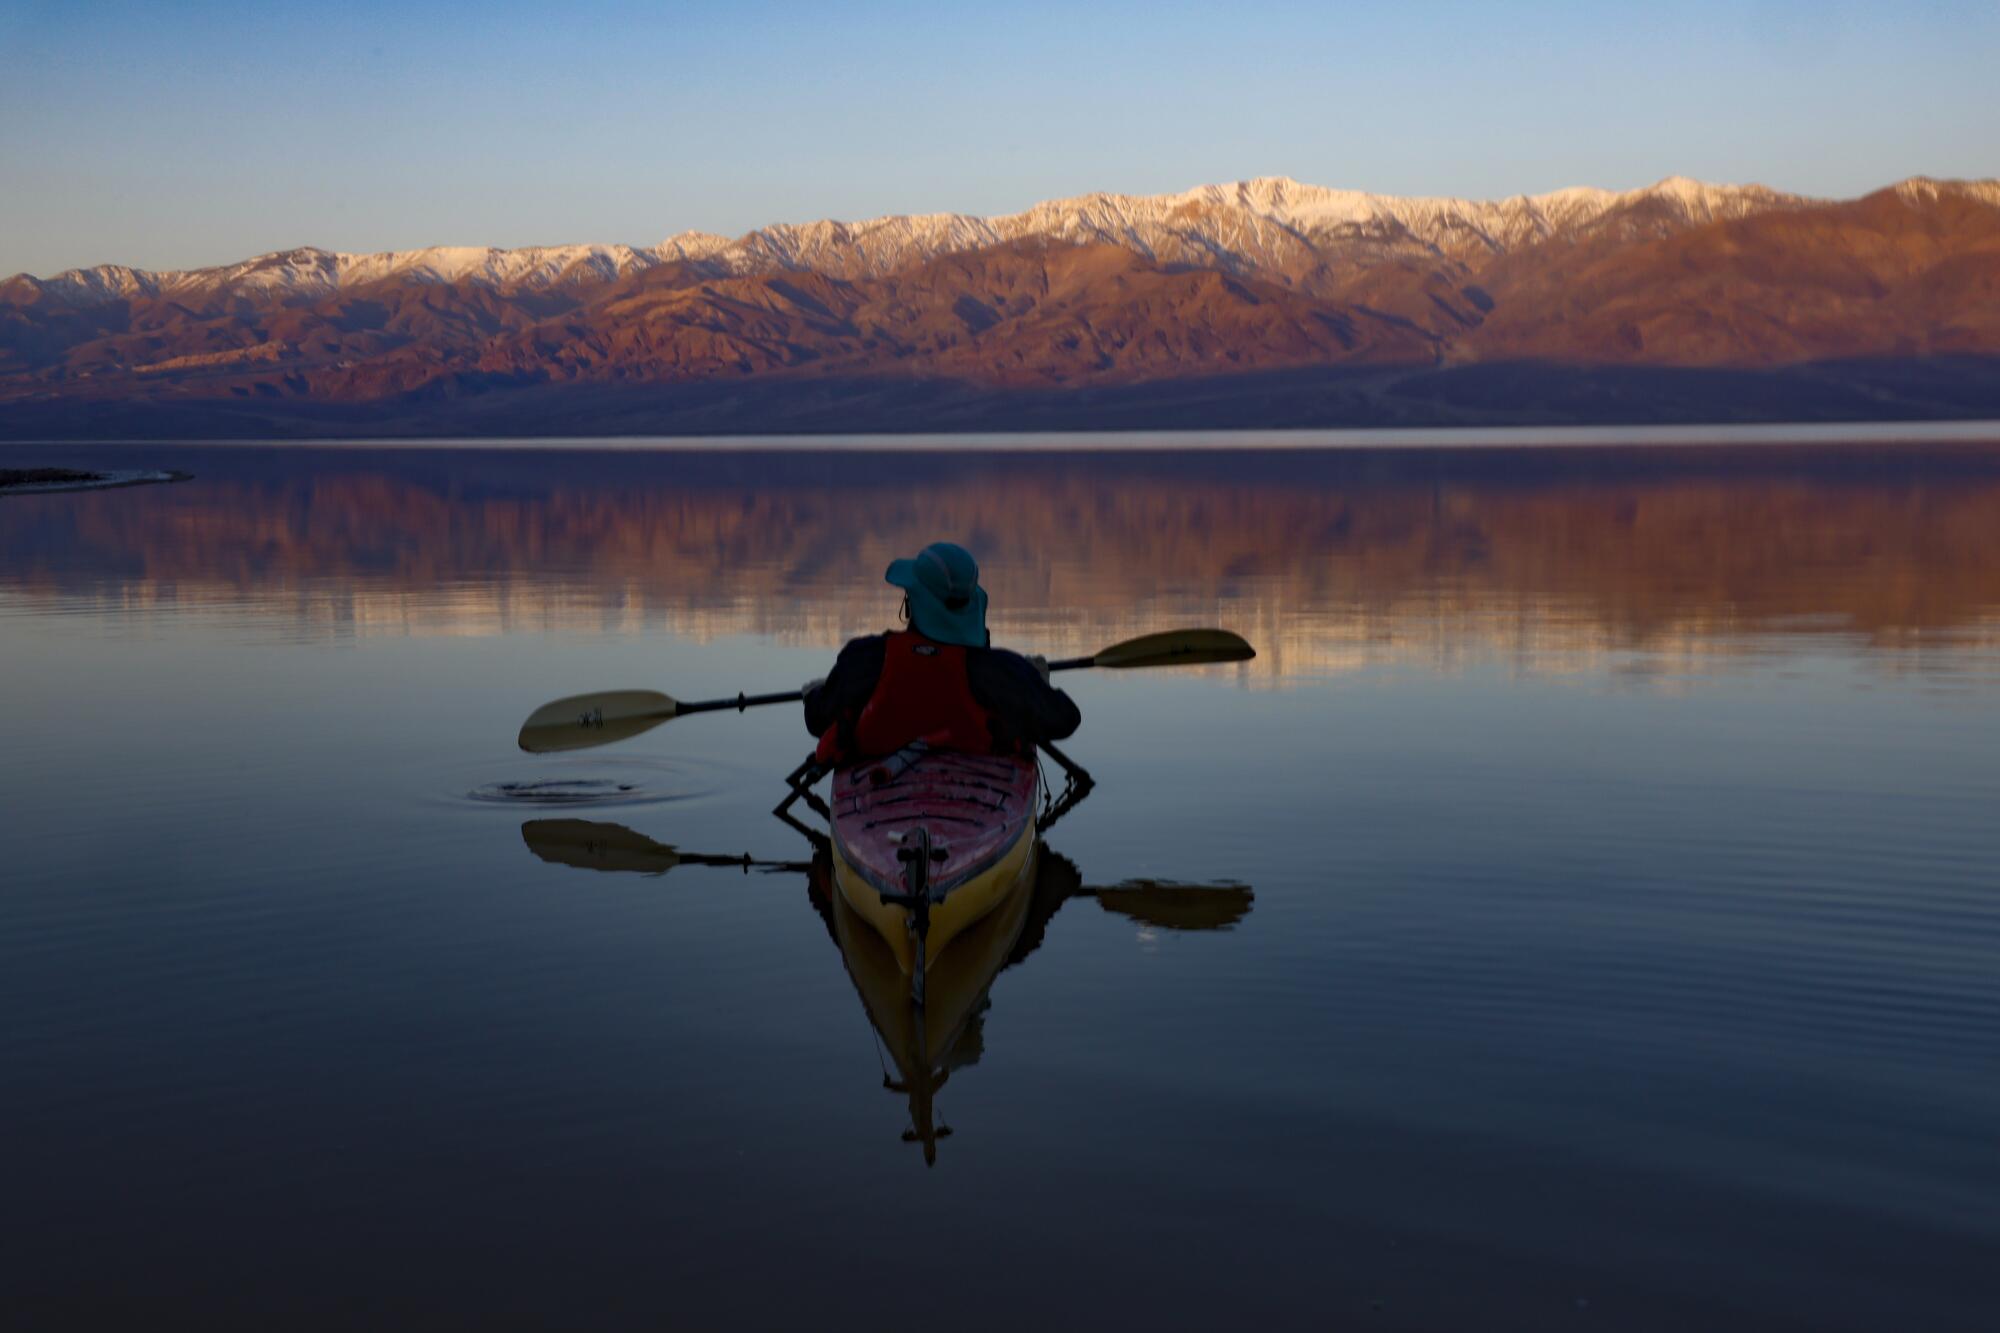 A man in a kayak plies a glassy lake with snowcapped mountains in the distance.